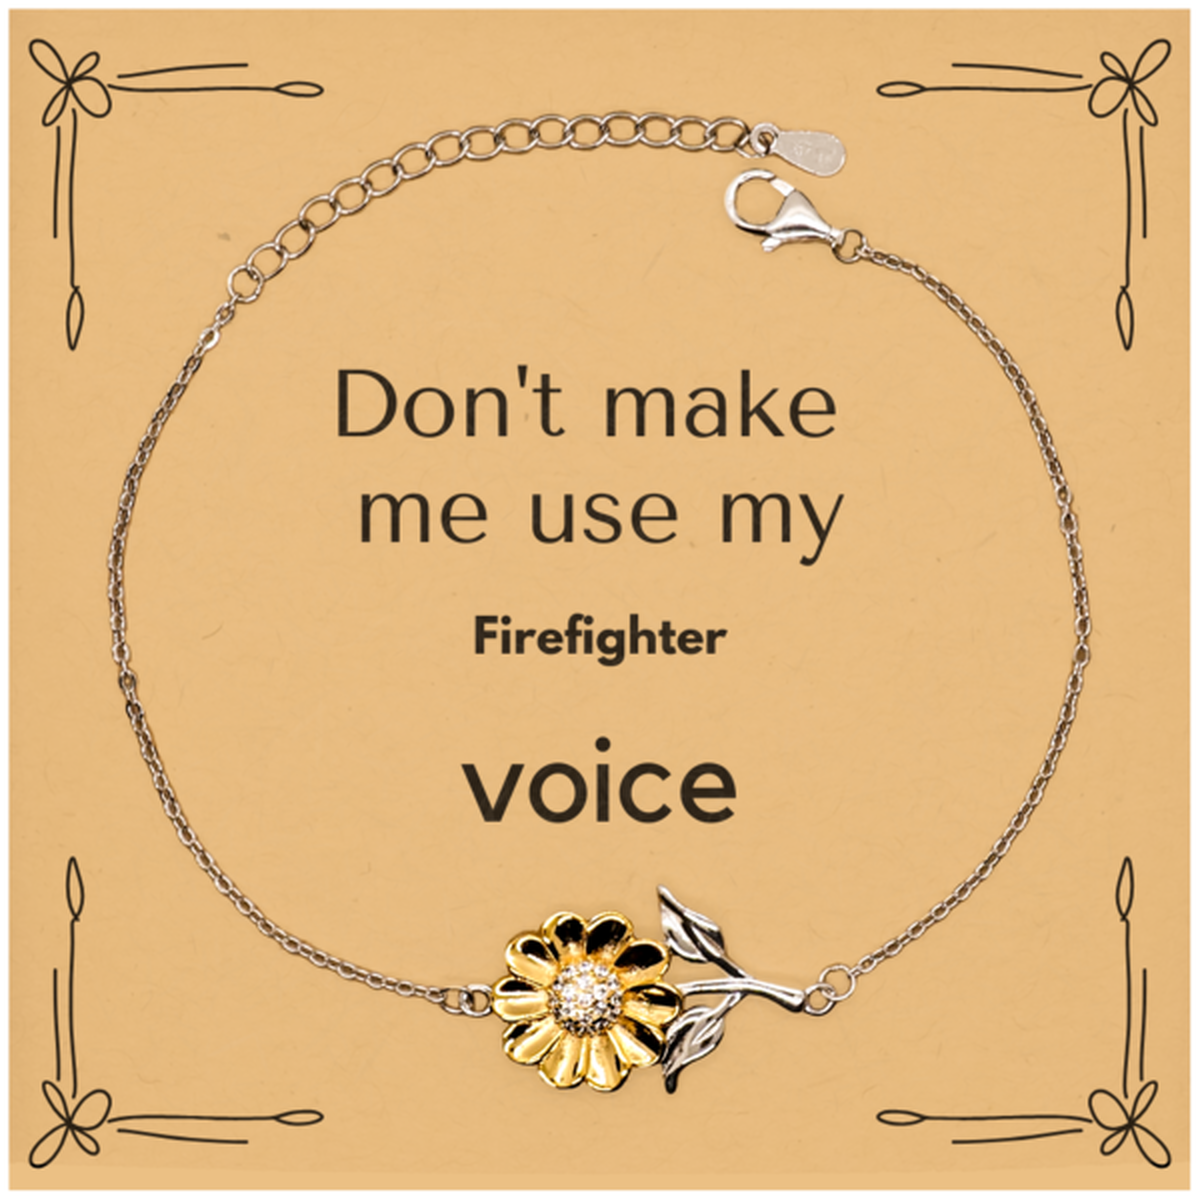 Don't make me use my Firefighter voice, Sarcasm Firefighter Card Gifts, Christmas Firefighter Sunflower Bracelet Birthday Unique Gifts For Firefighter Coworkers, Men, Women, Colleague, Friends